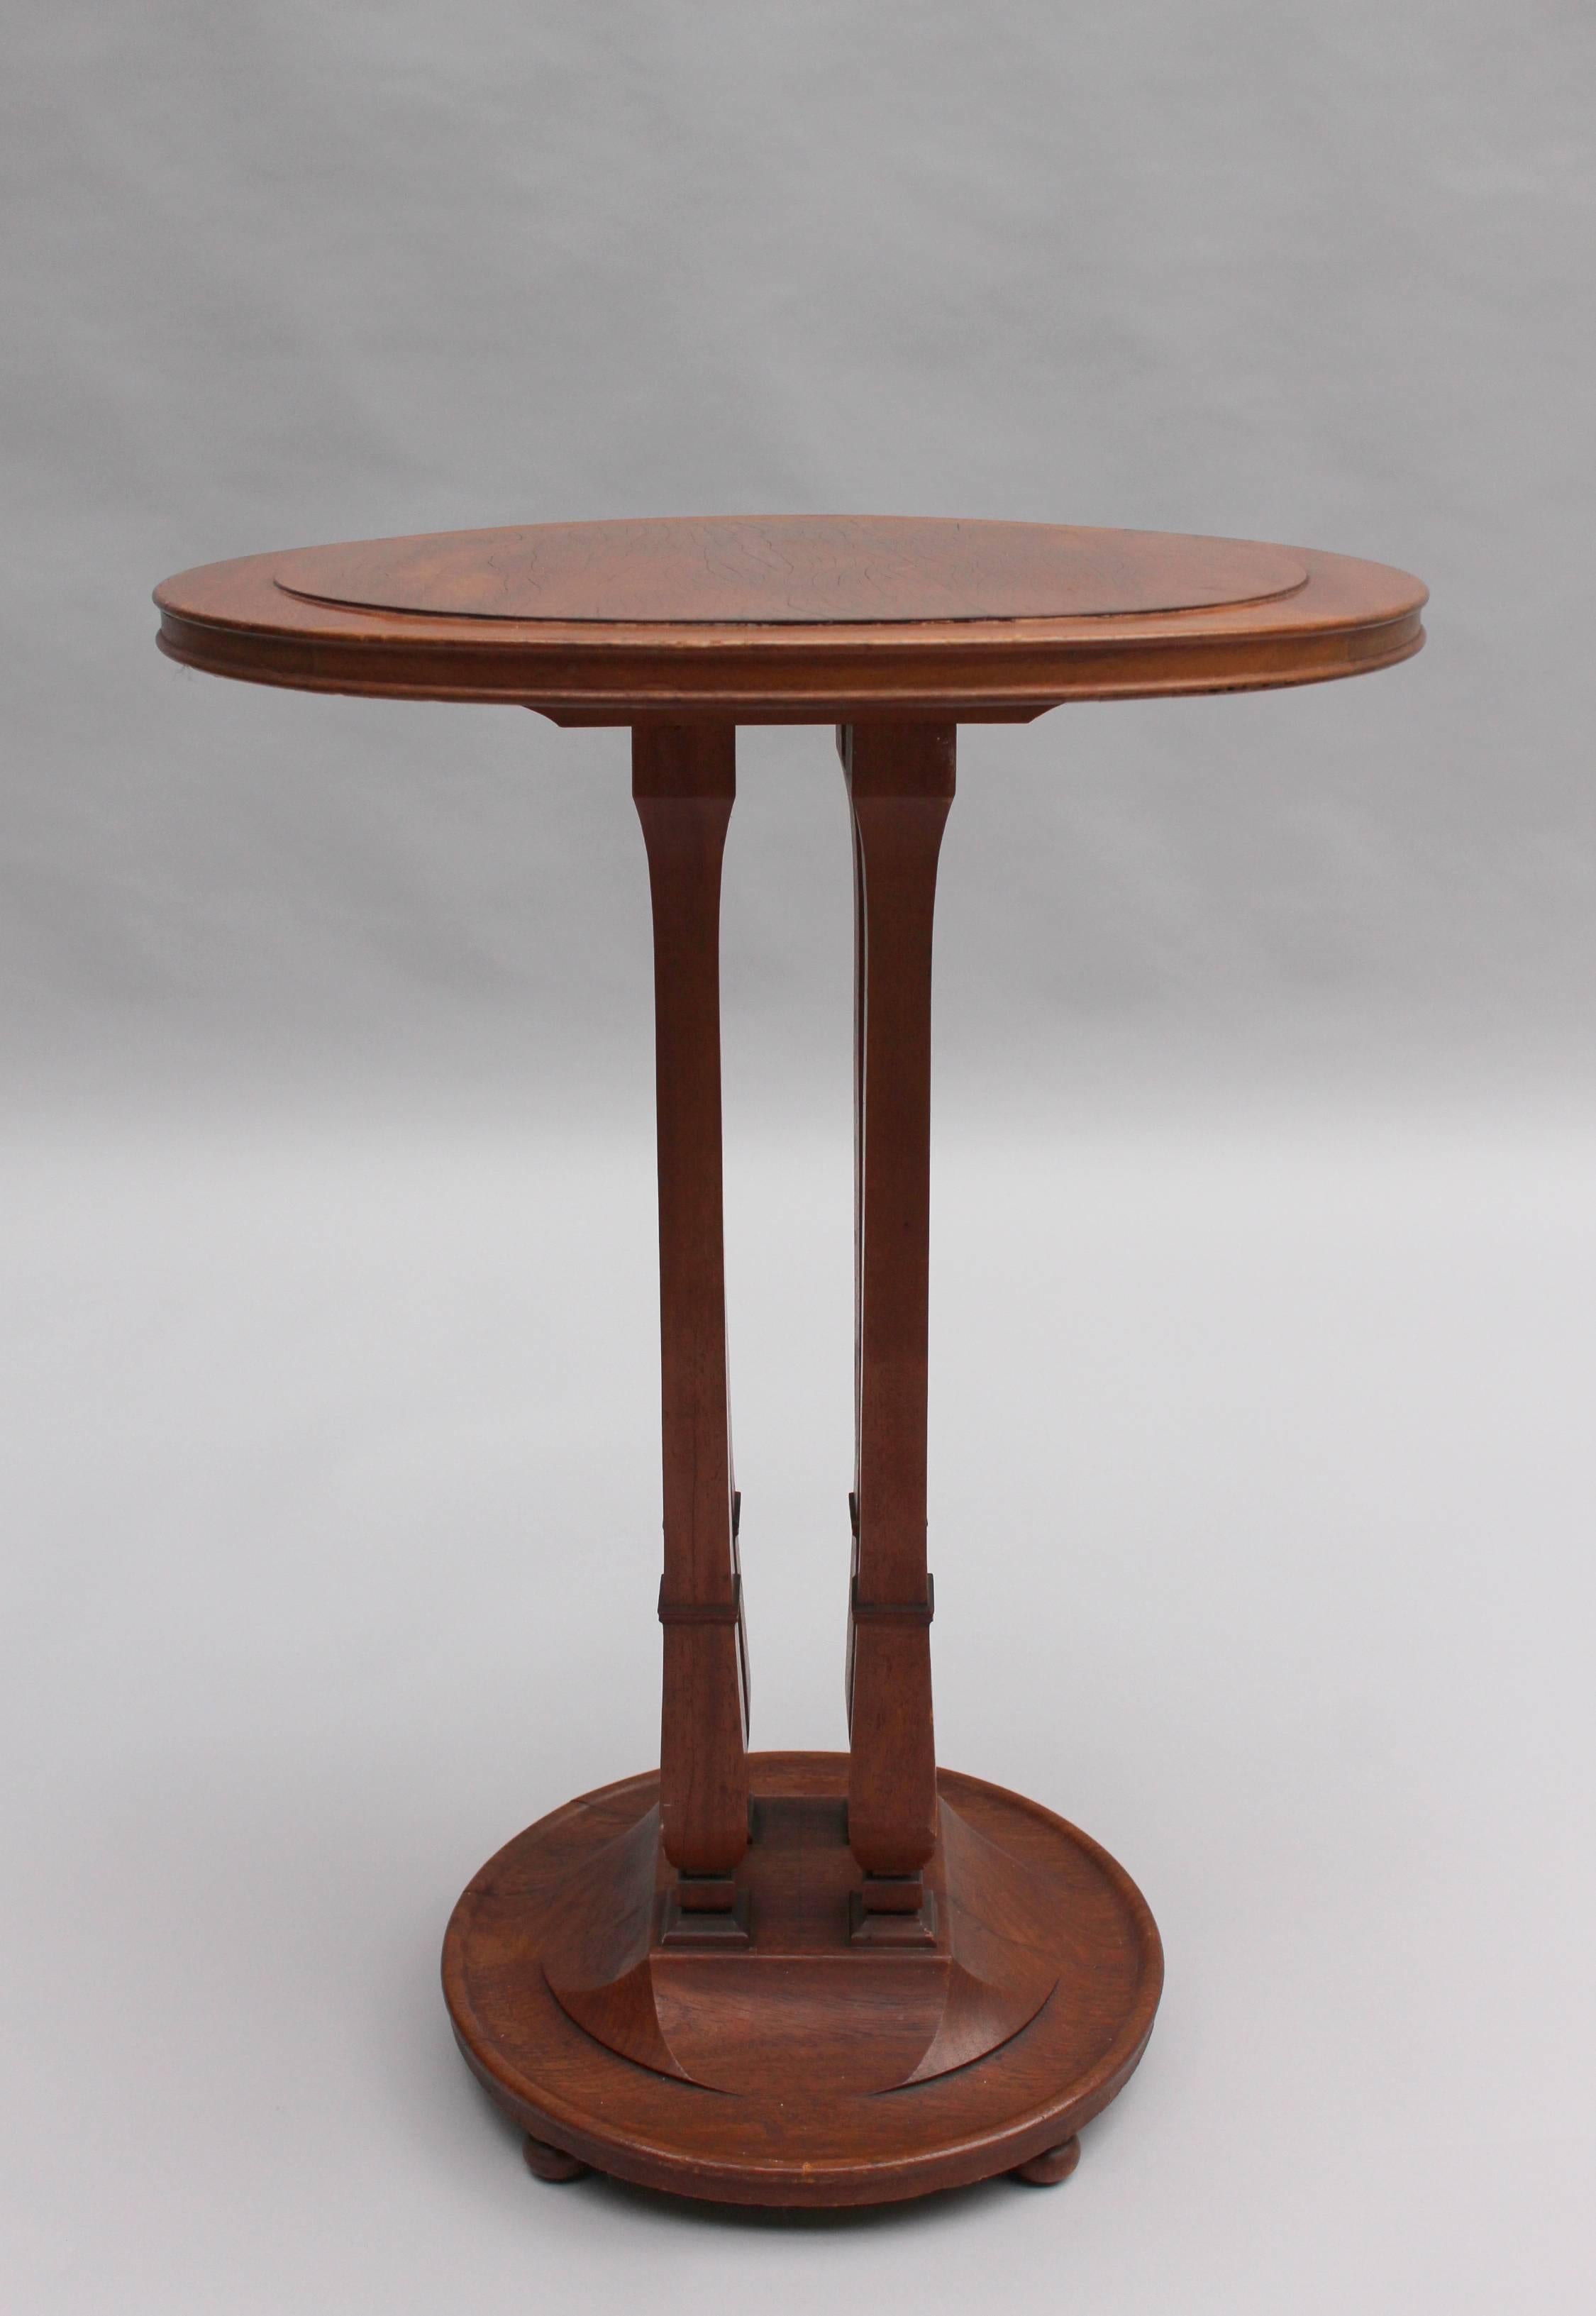 Fine French Art Nouveau - Art Deco Walnut Gueridon by Tony Selmersheim In Good Condition For Sale In Long Island City, NY